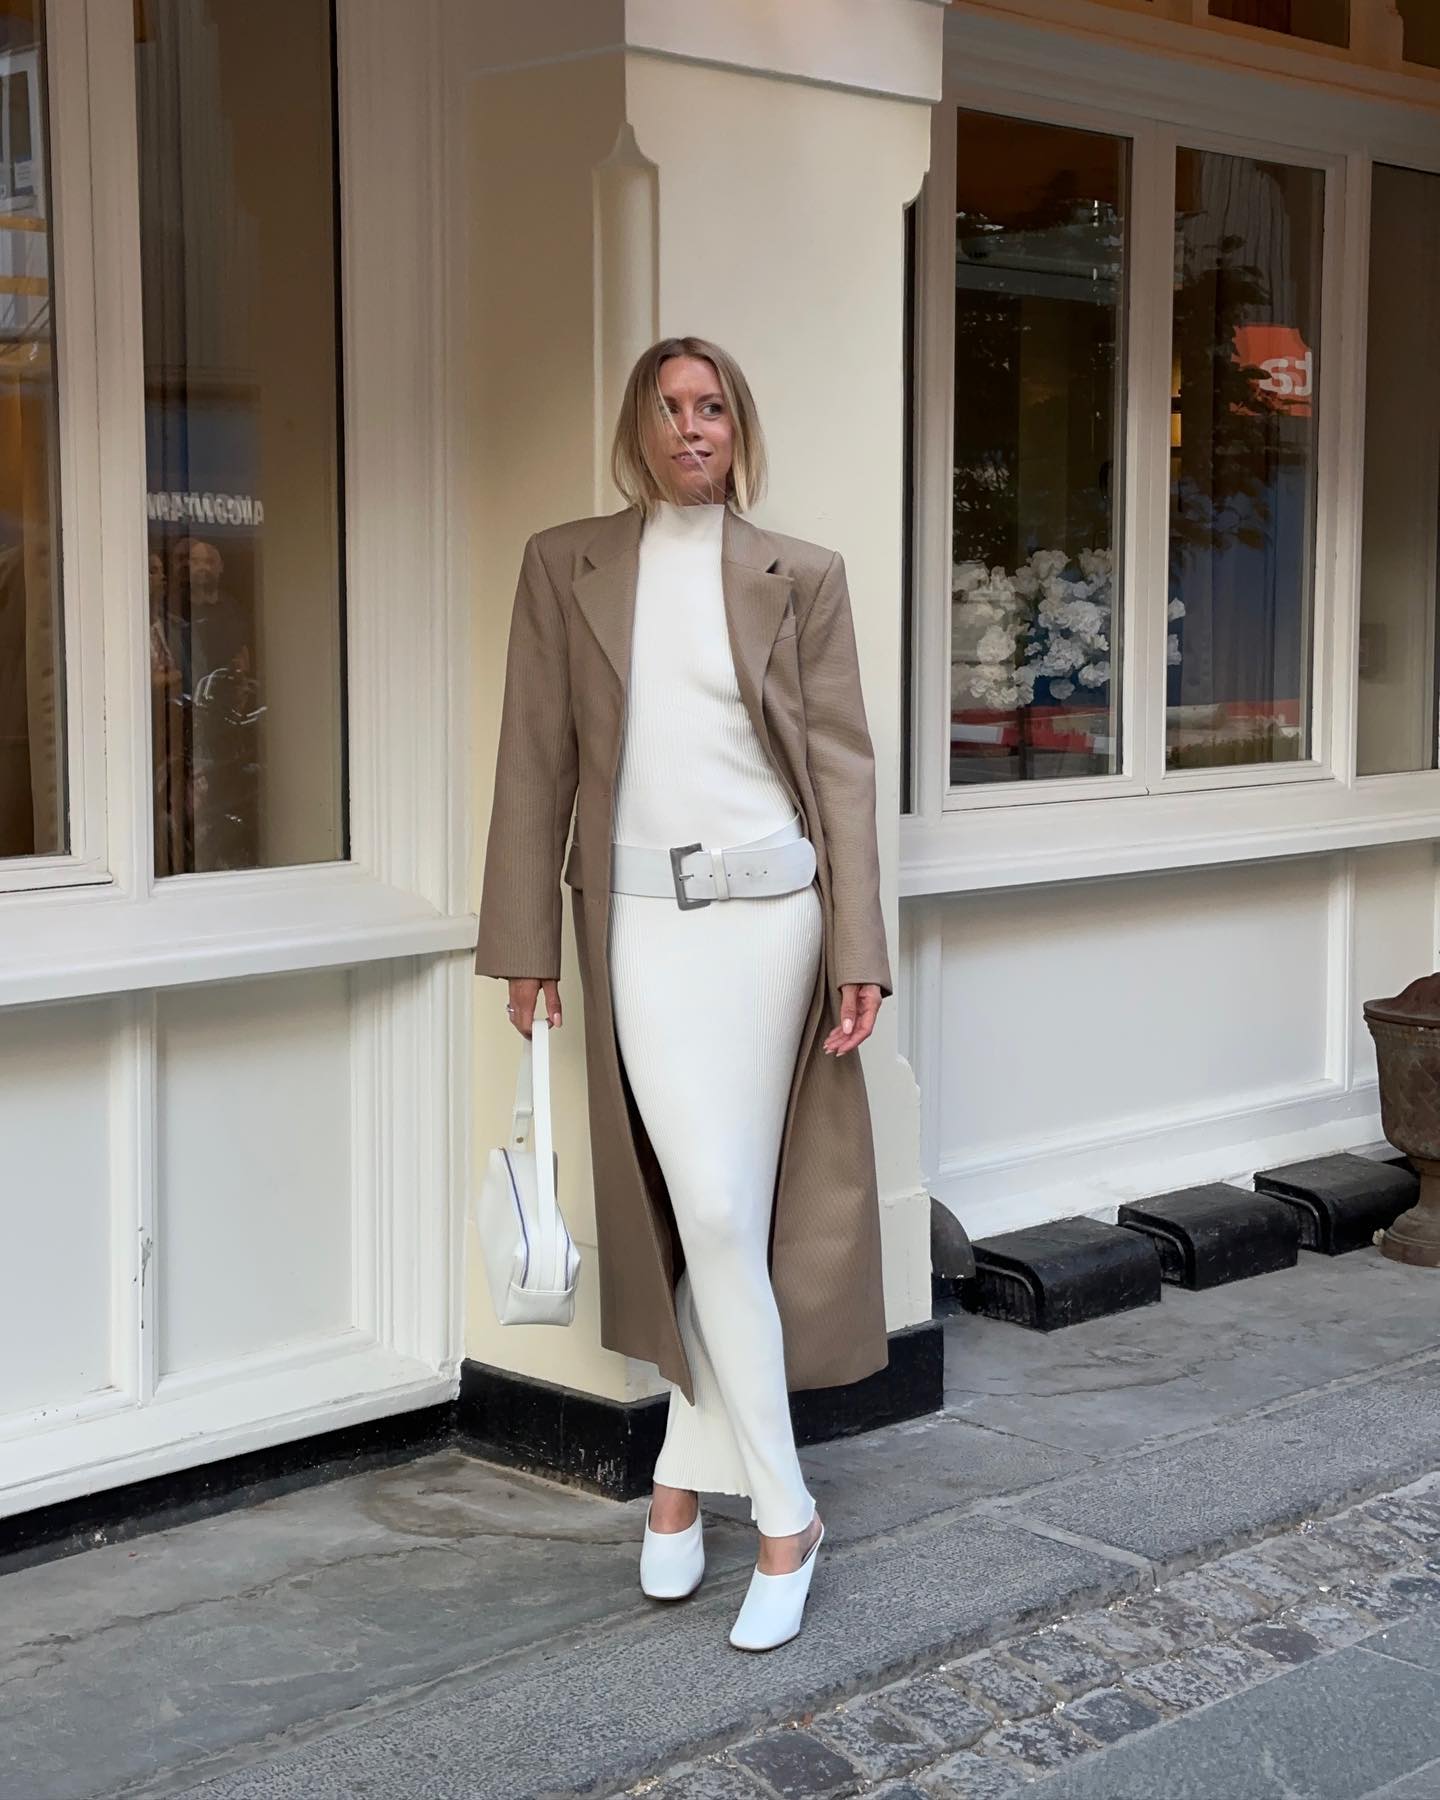 Woman wears white dress, white belt, beige long jacket, white shoes and white bag